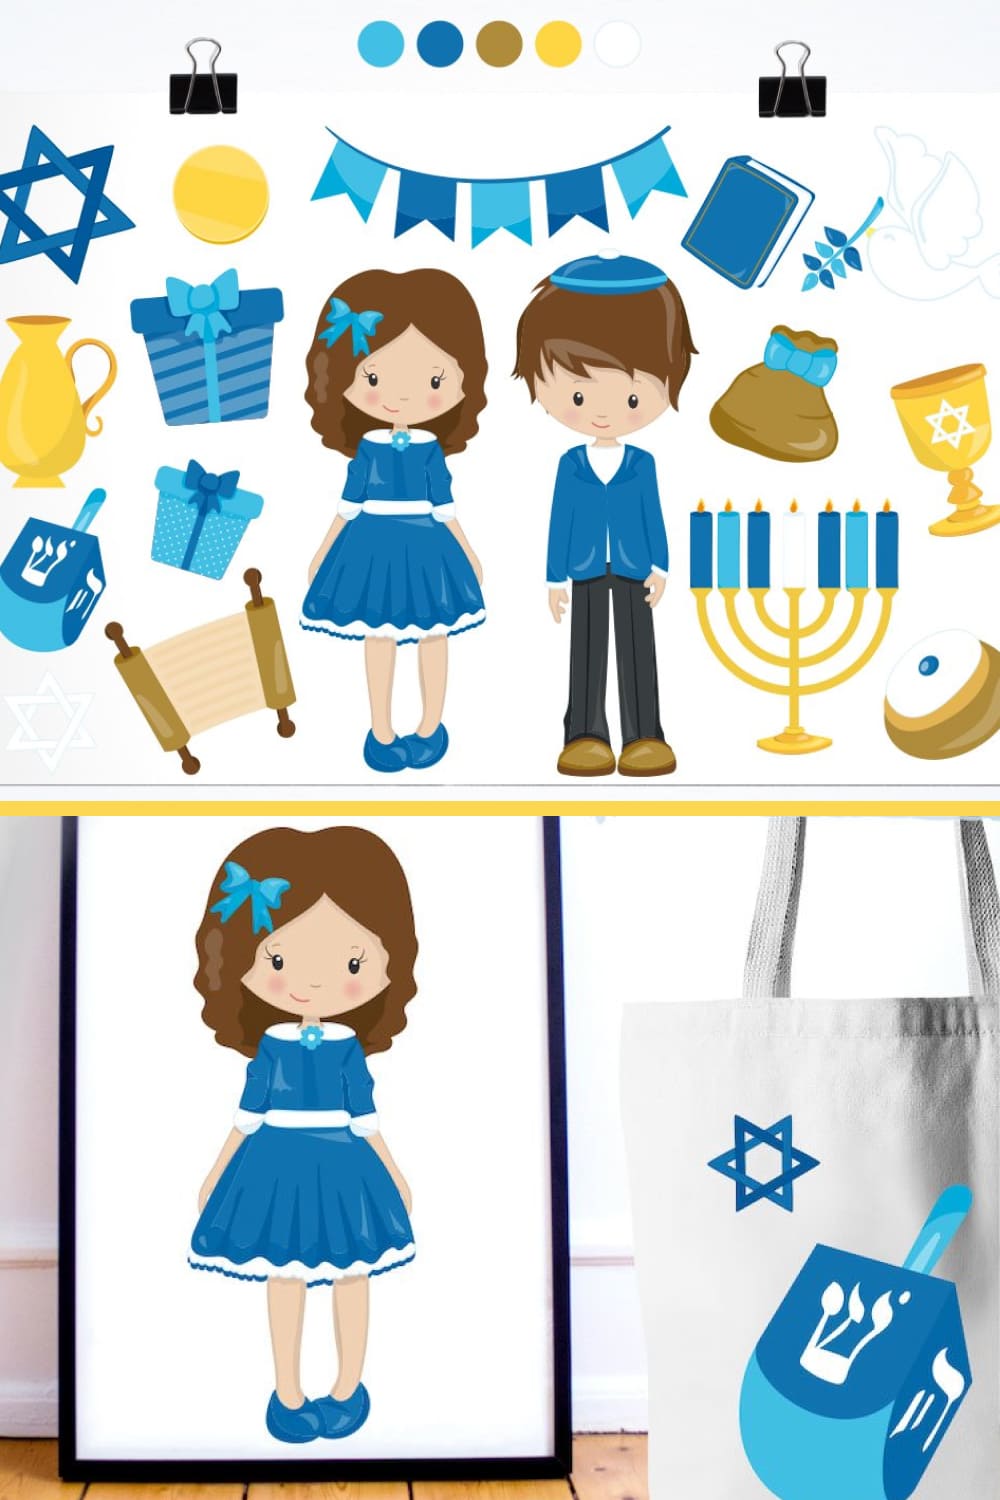 Beautiful children and icons on the theme of Hanukkah.